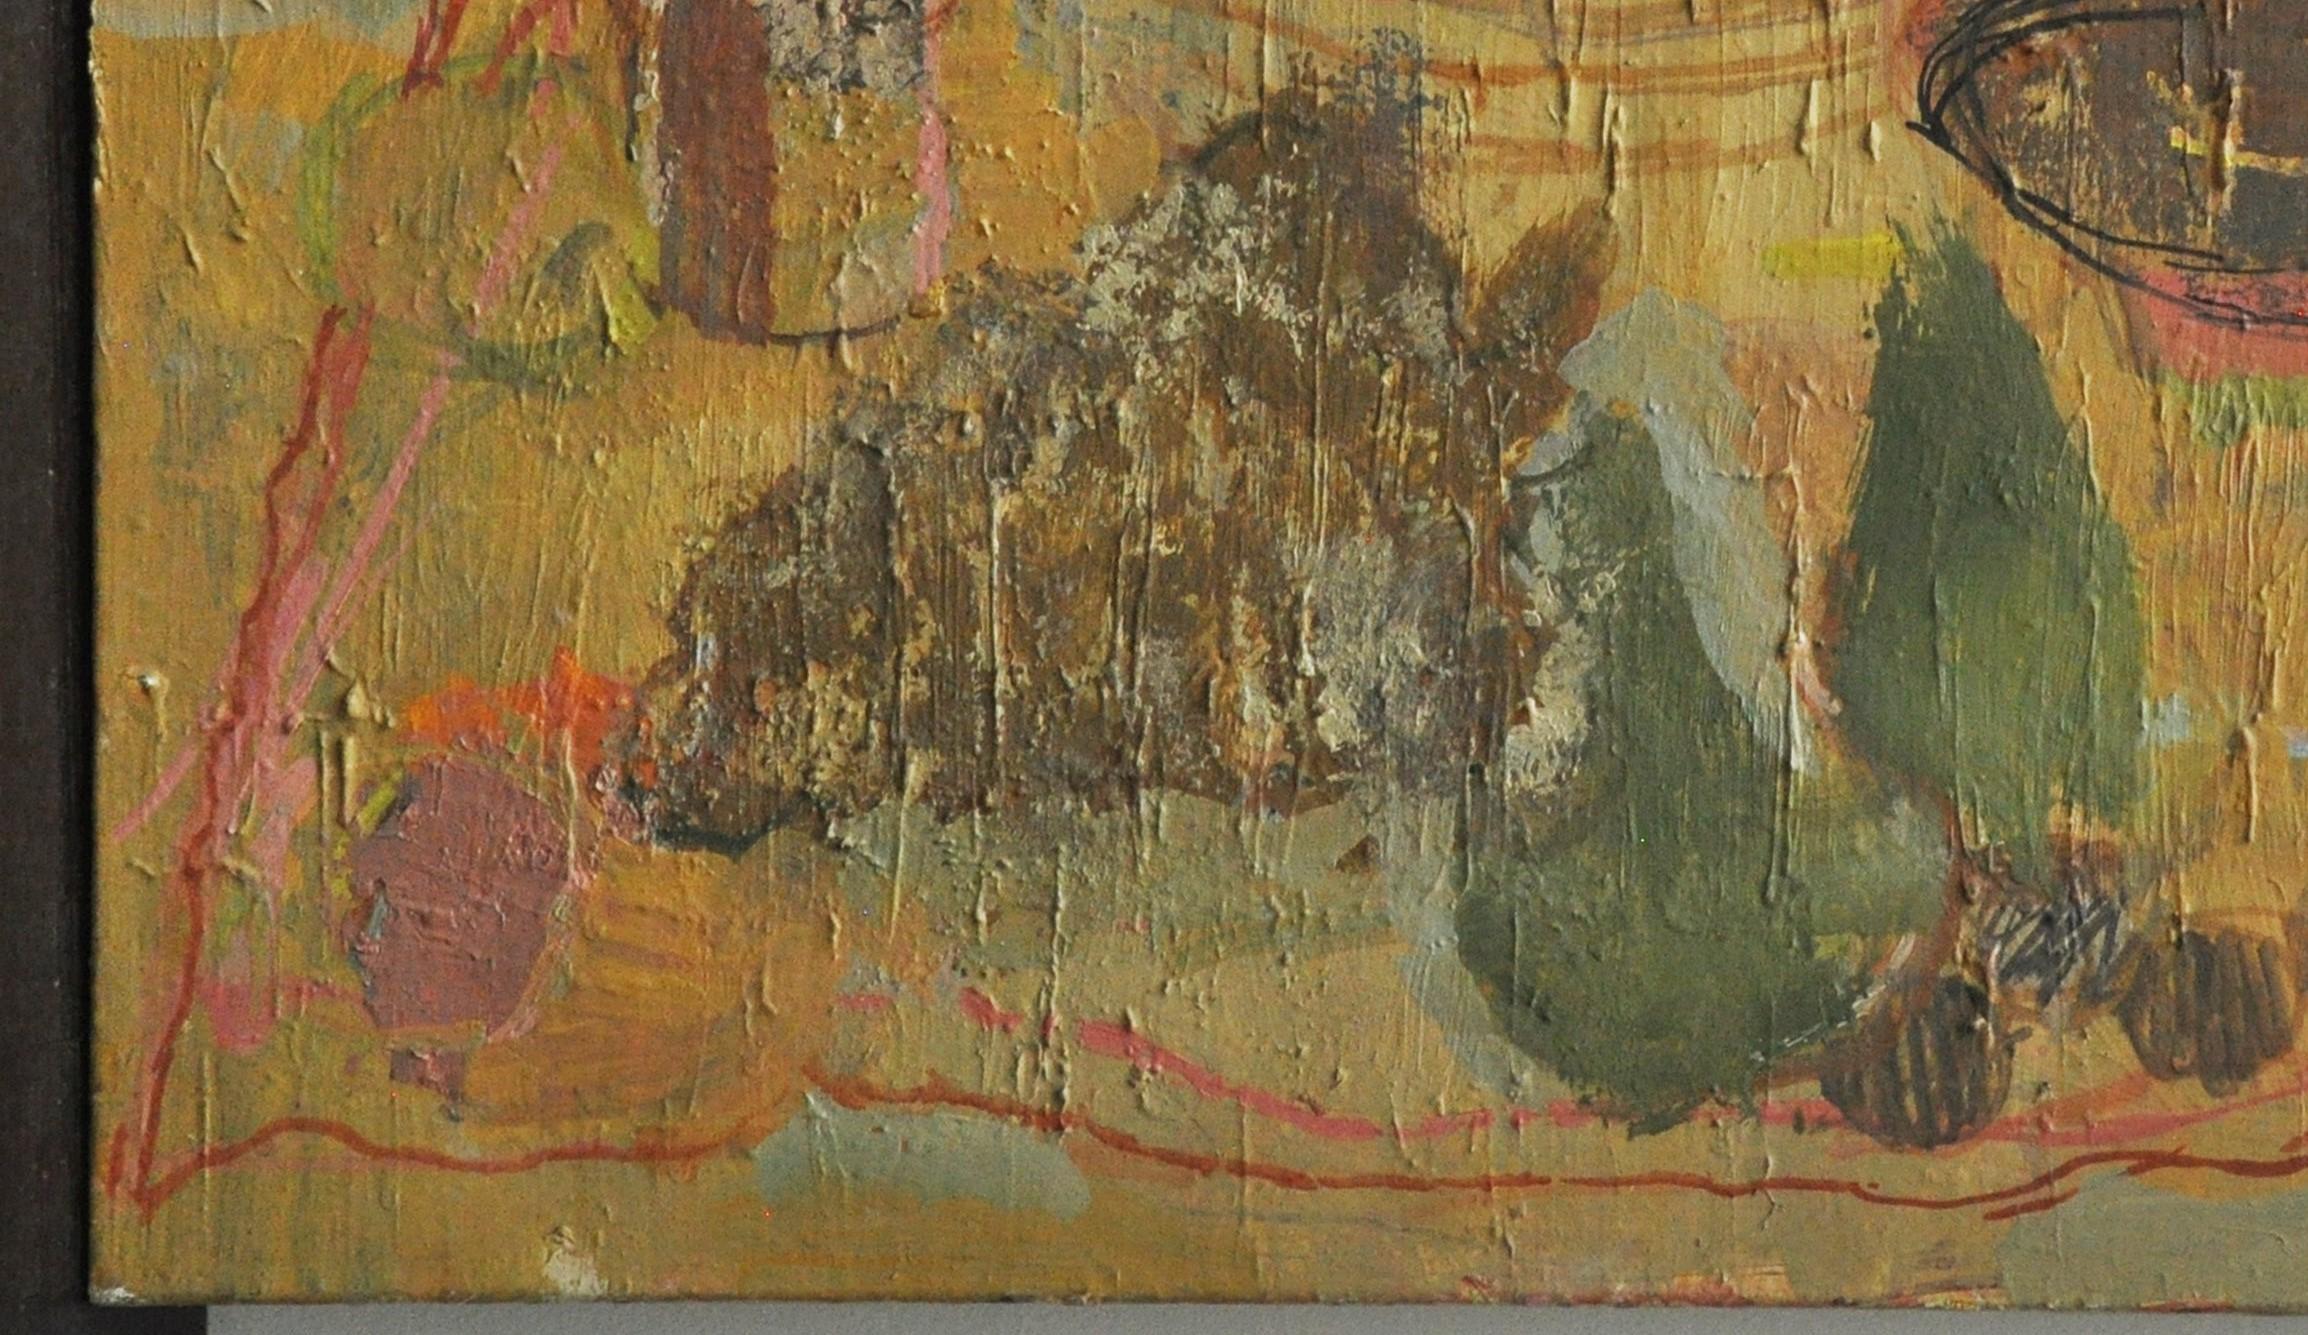 Abstract still life in muted tones of green, yellow and brown. Midcentury oil on canvas.